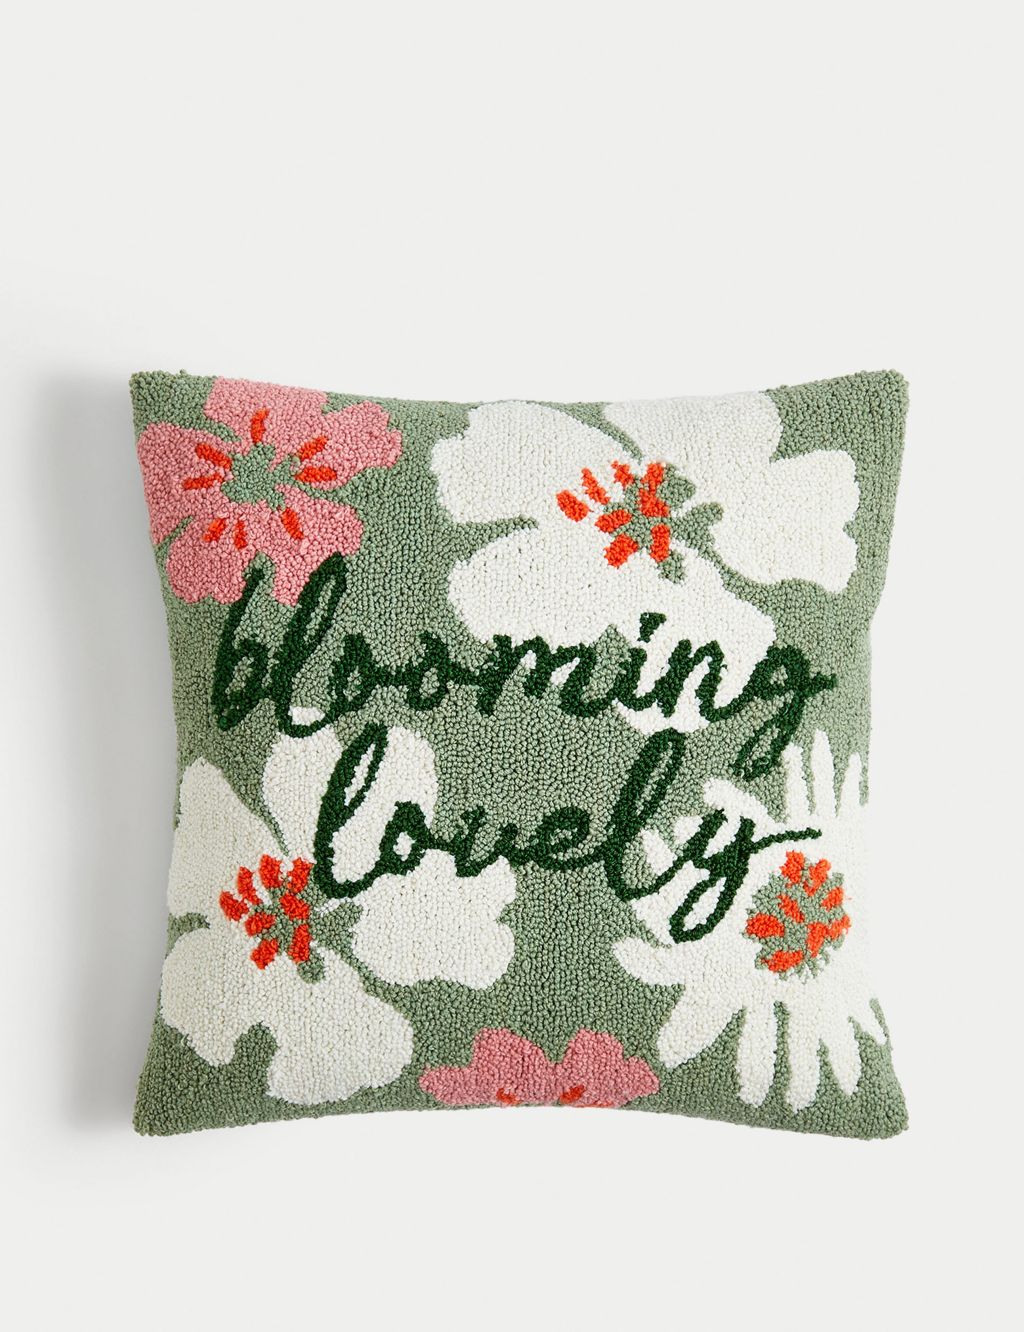 Cotton Rich Floral Embroidered Cushion image 1